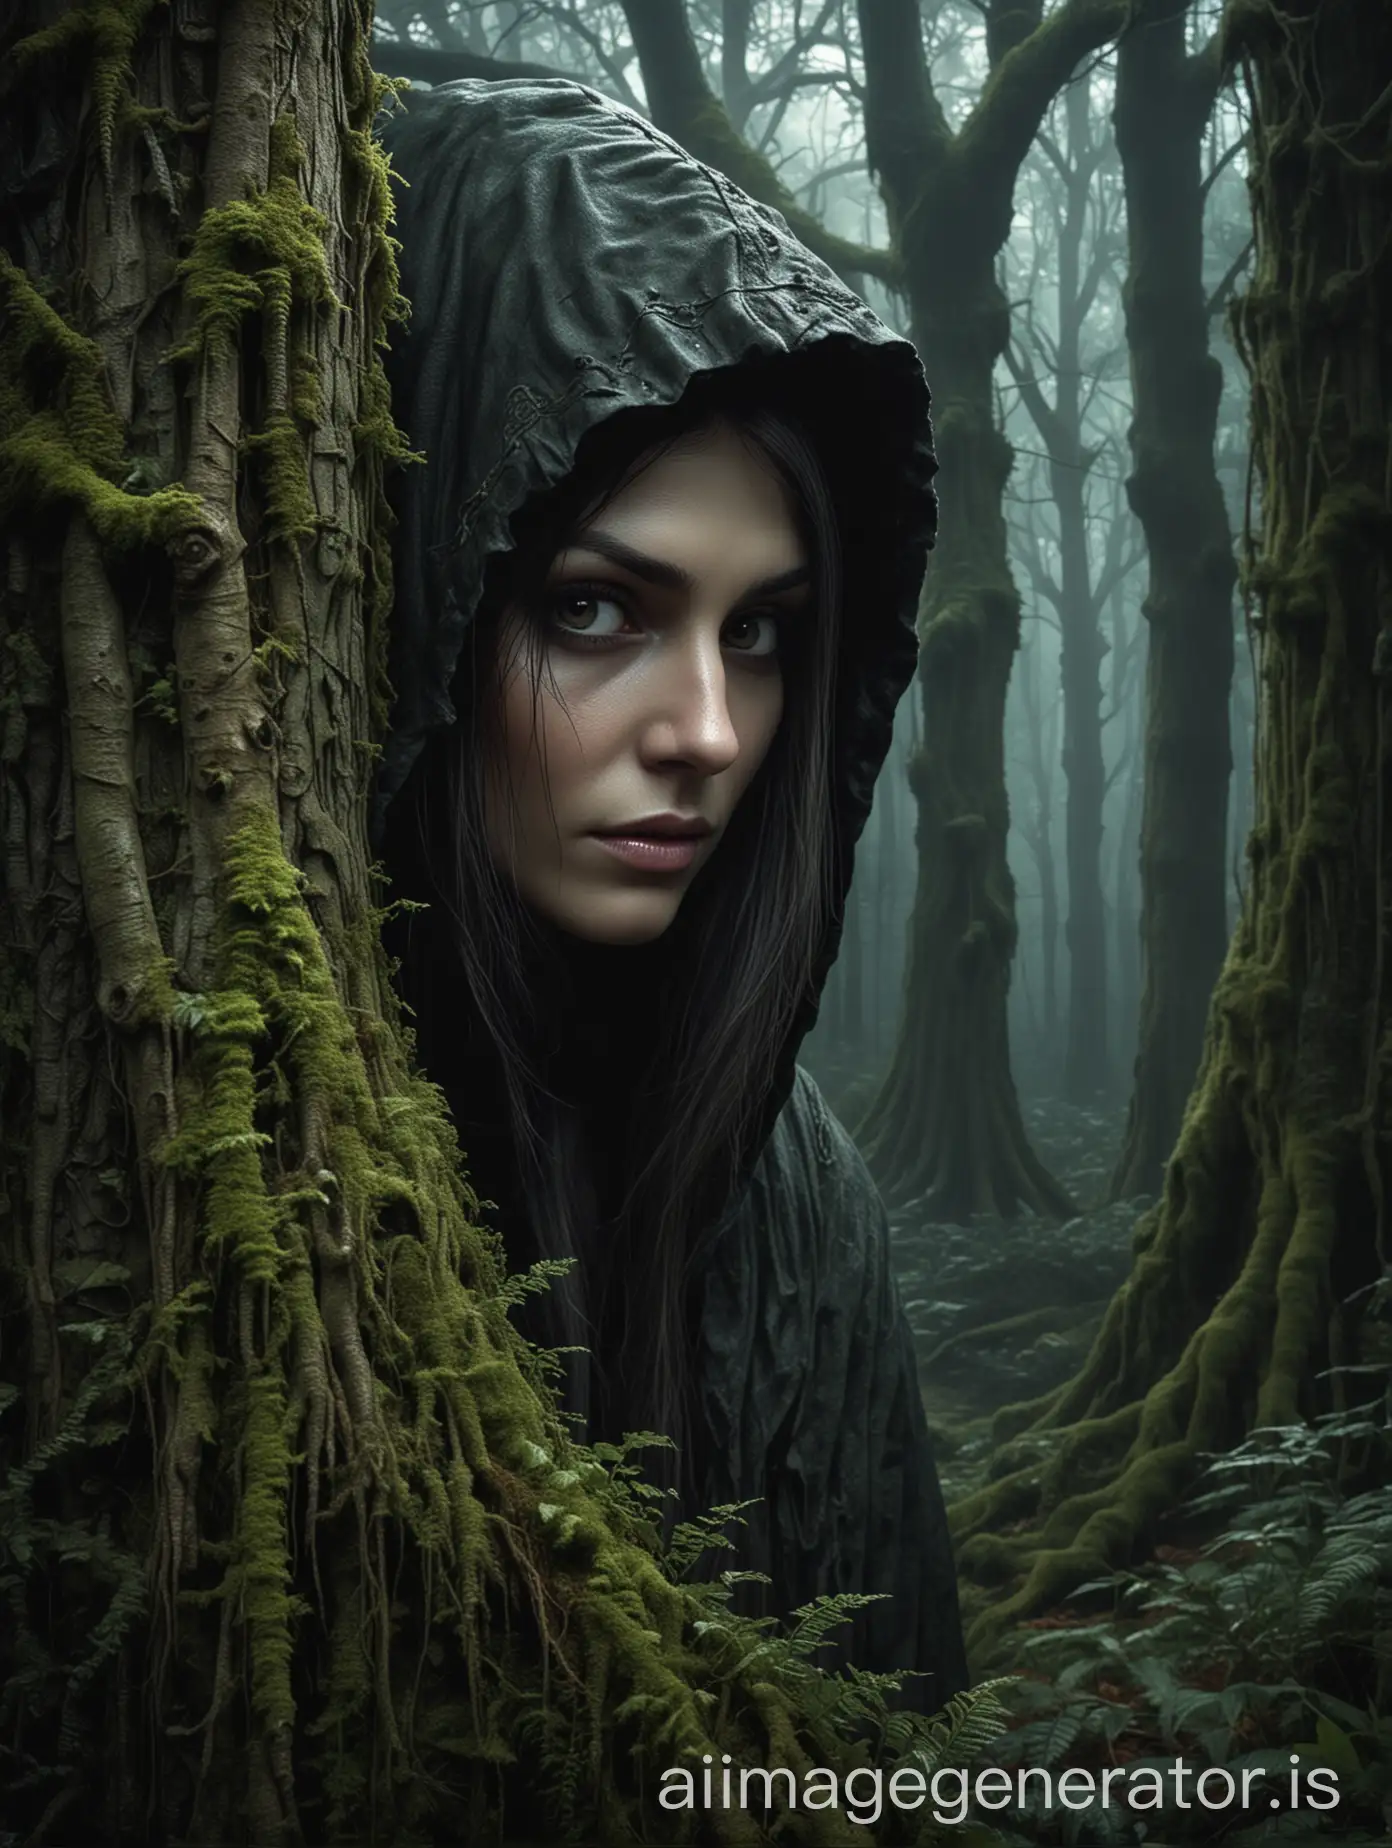 wide-view, anne stokes art style, woman in  medieval hood, hiding behind mossy tree,  huge fantastical creepy leszy troll figure creeping  behind, background of dark forest trees in the midnight